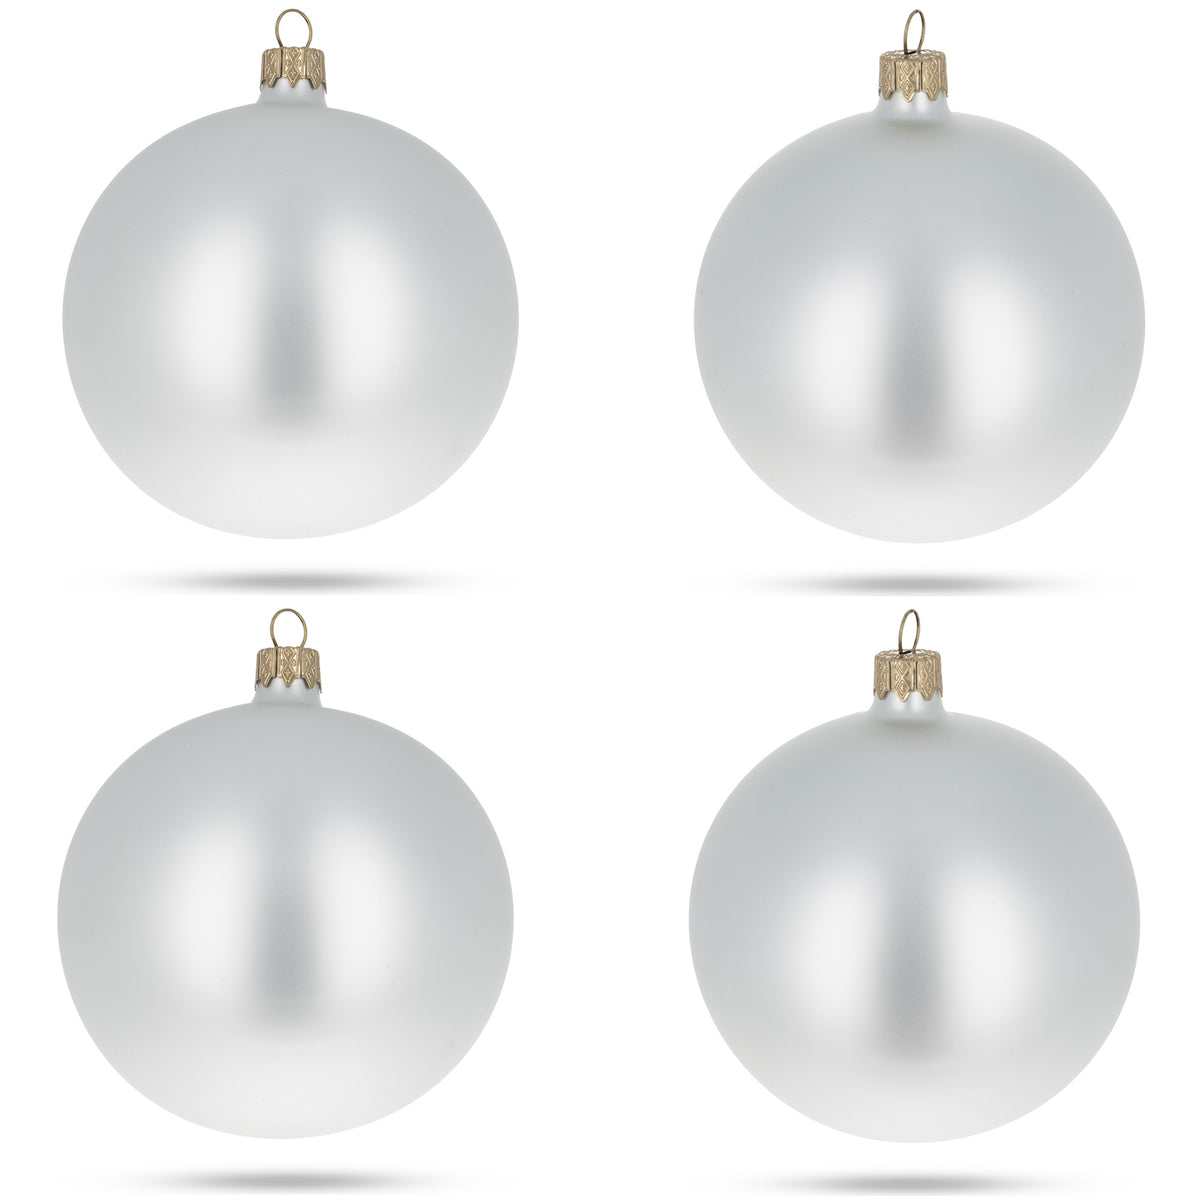 Buy Set of 4 White Matte Glass Ball Christmas Ornaments 4 Inches ...